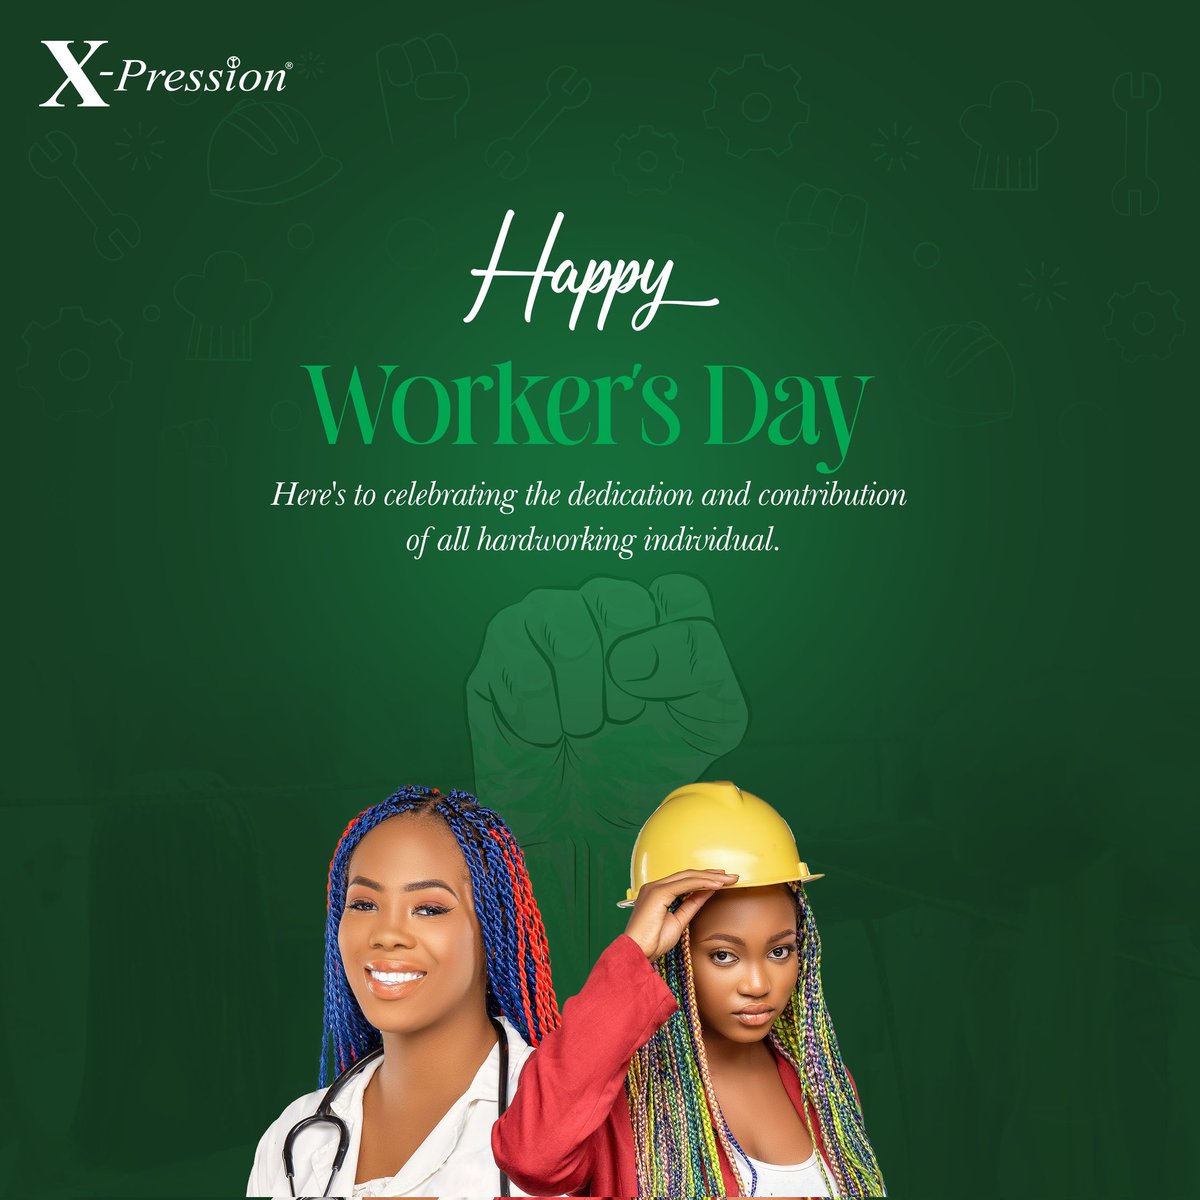 Happy new month and Happy Workers' Day! Wishing you a wonderful May filled with achievements, joy, and well-deserved celebrations. Here's to honoring your hard work and dedication. #xp4you #xpression #xpressionhair #workersday #workers #Celebration #hardwork #dedication